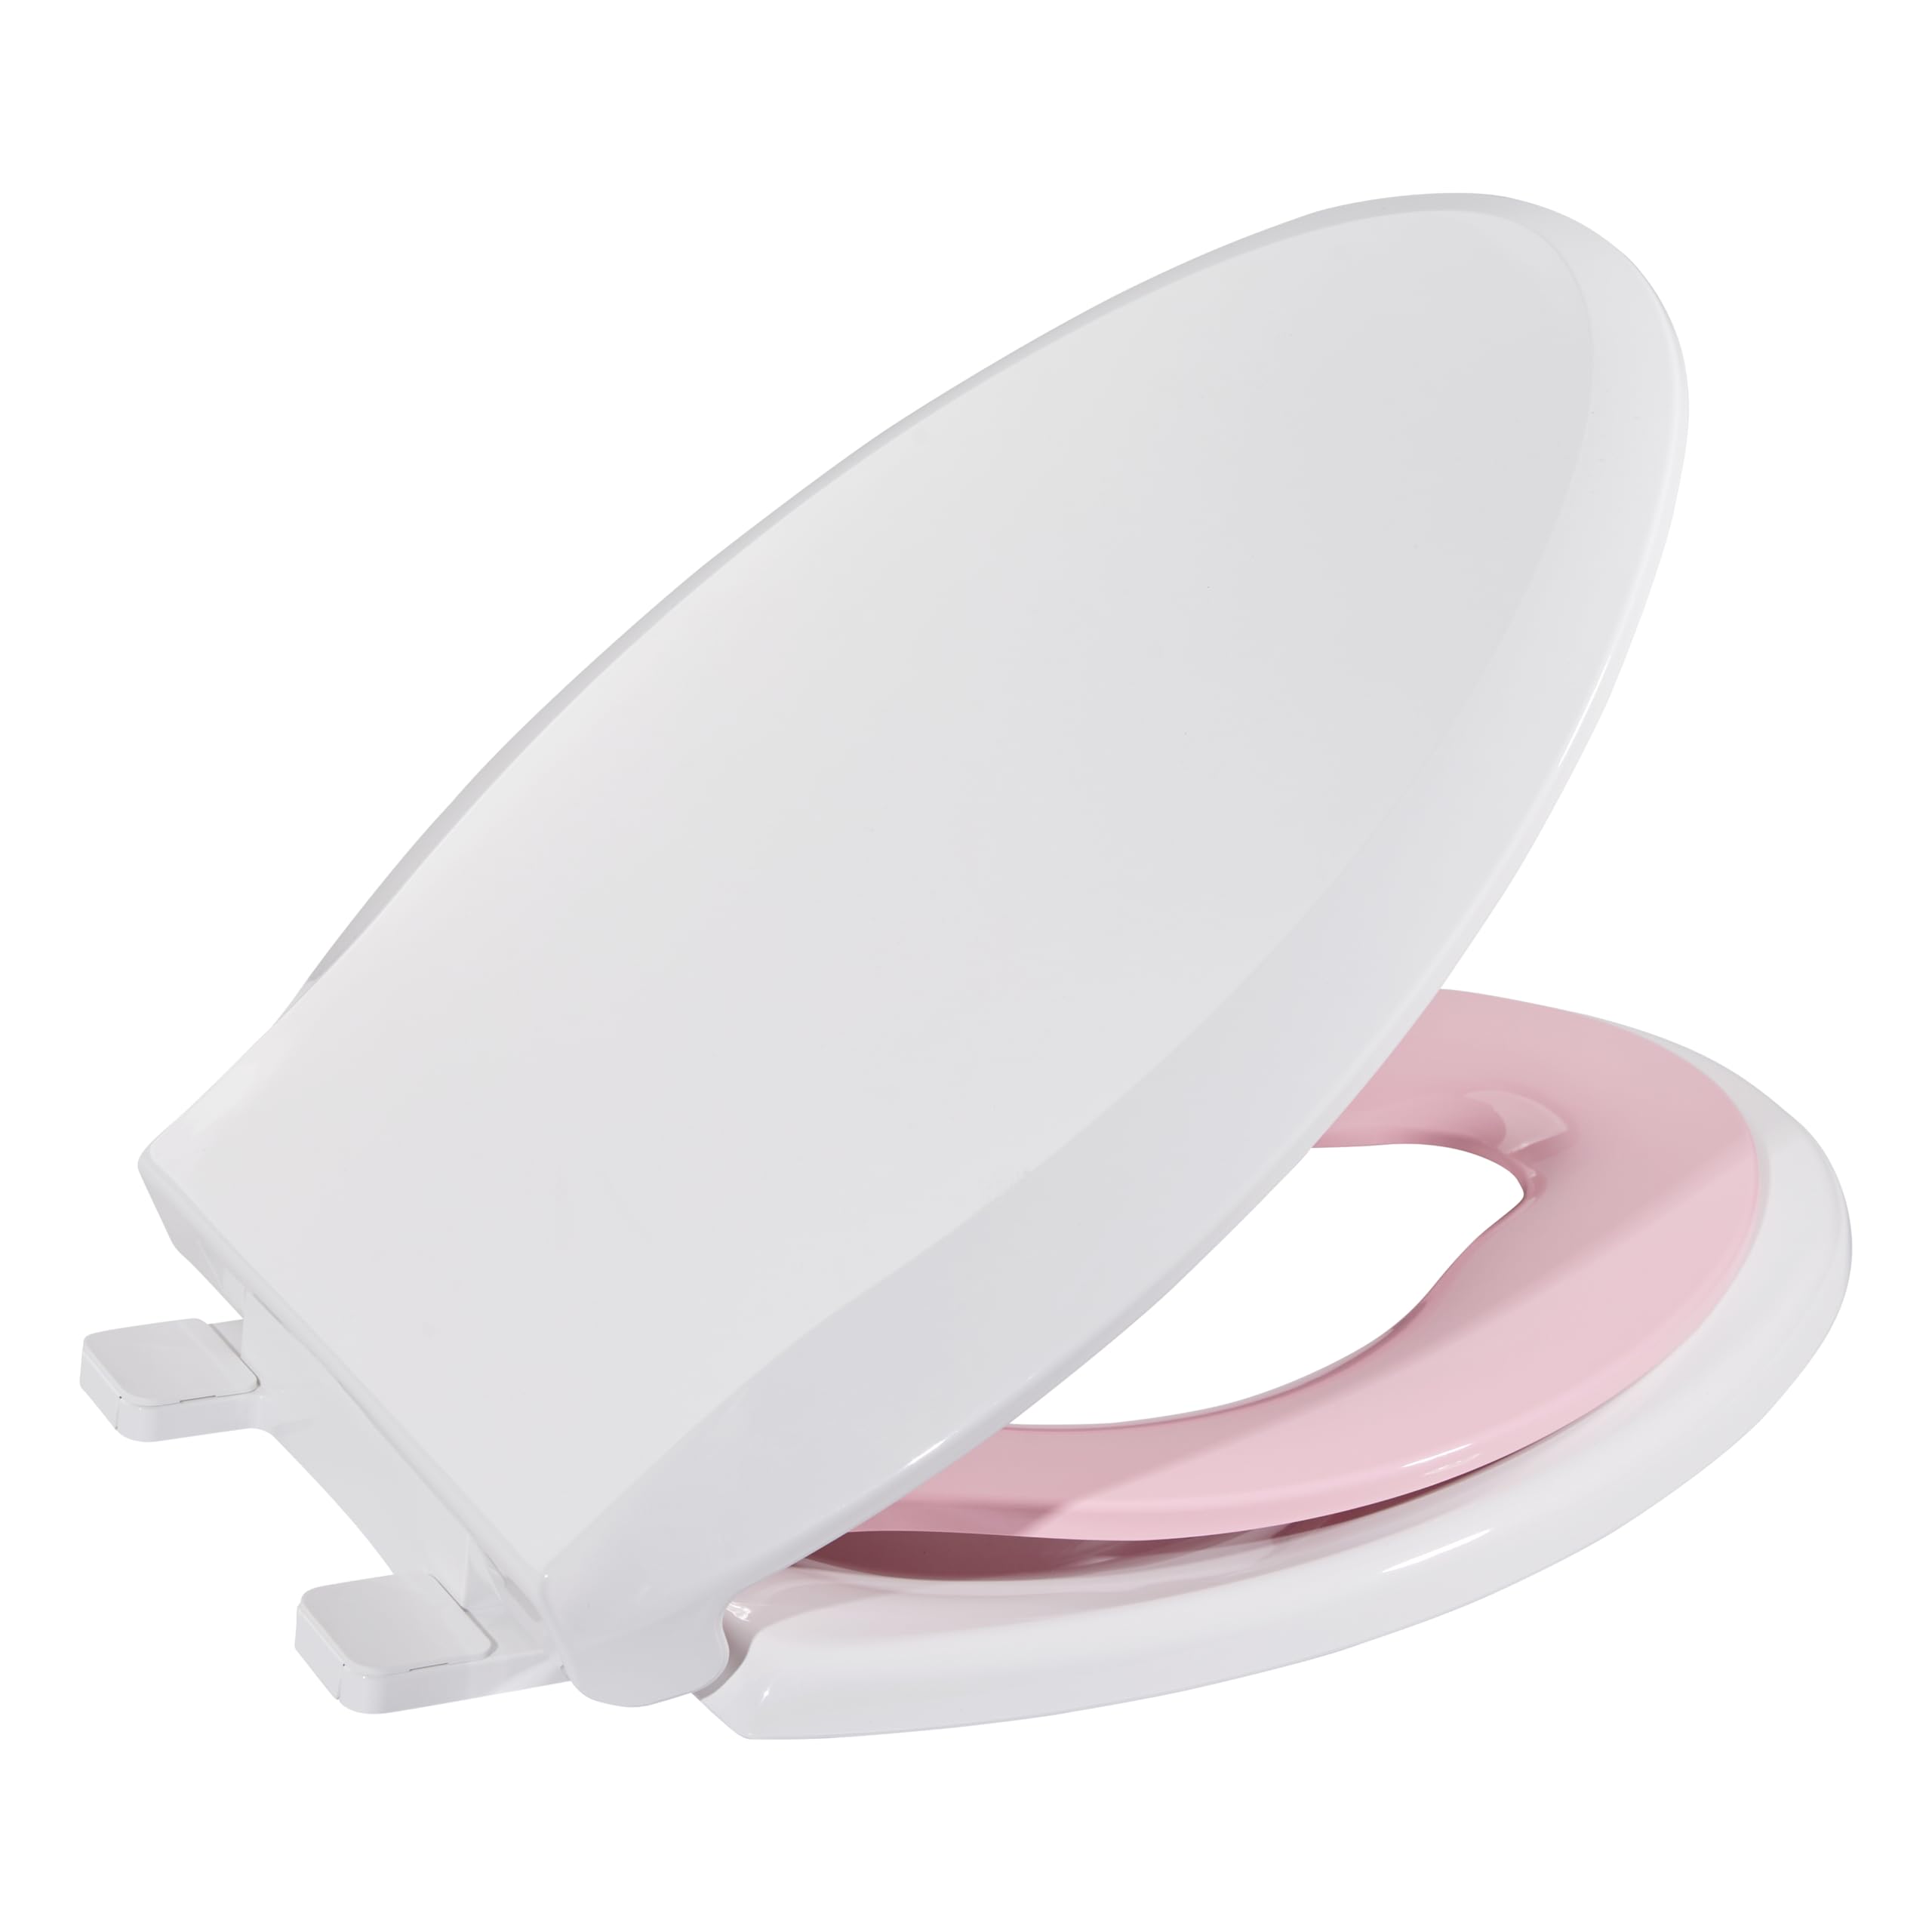 Toilet Seat, Elongated Toilet Seat with Toddler Seat Built in, Potty Training Toilet Seat Elongated Fits Both Adult and Child, with Slow Close and Magnets- Elongated White and Pink